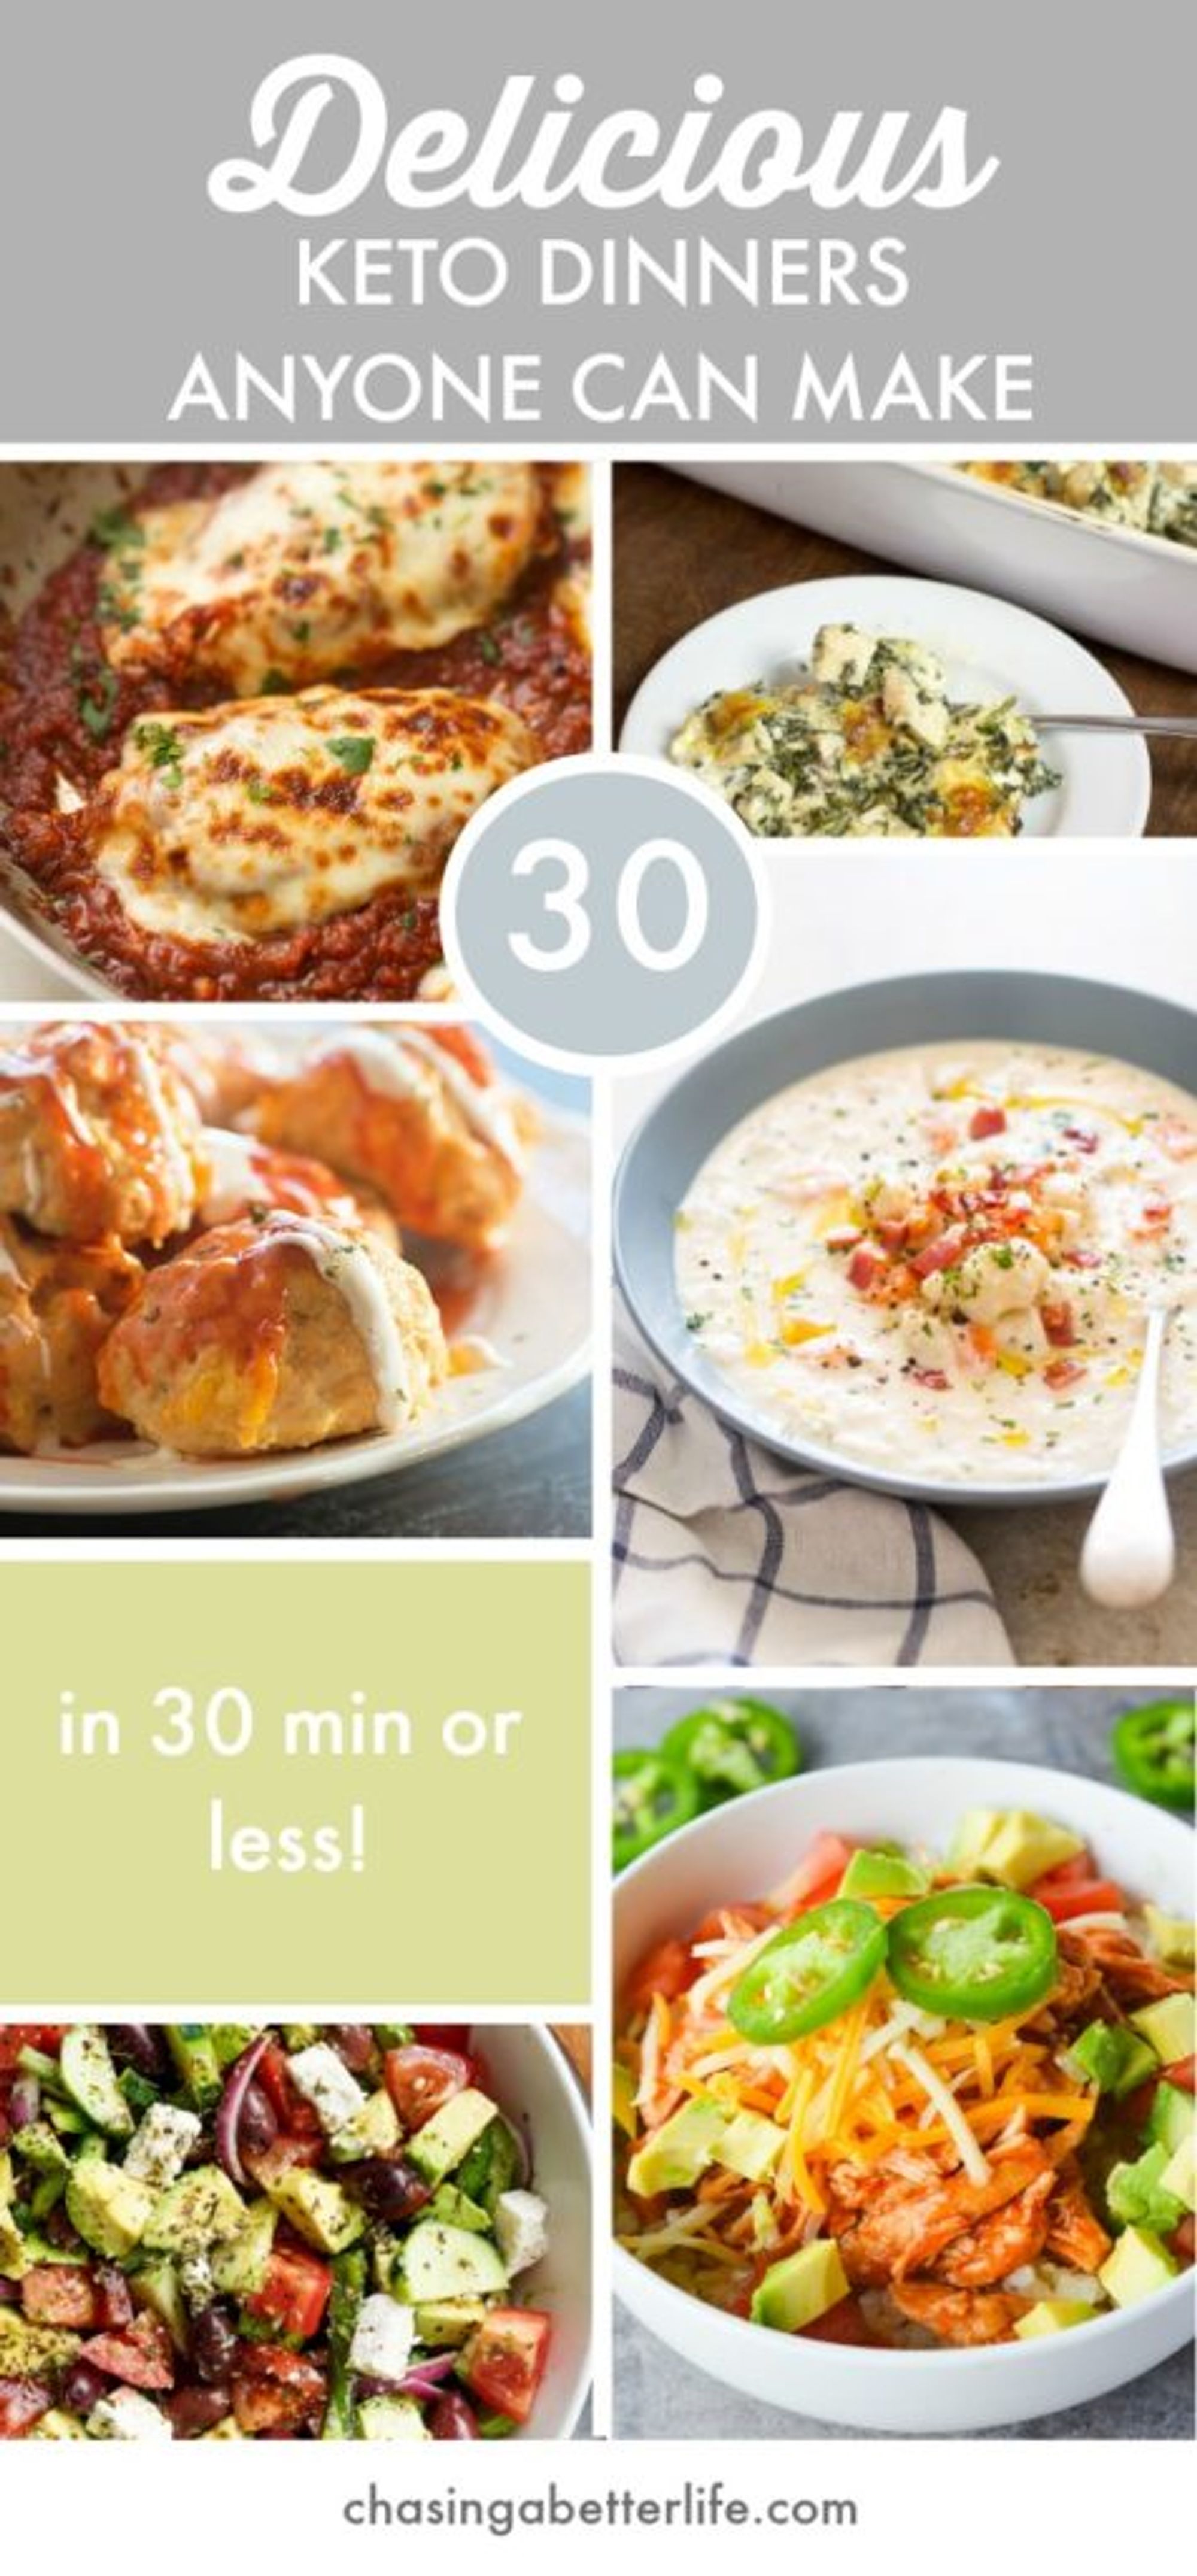 30 Keto Dinners You Can Make in 30 Minutes or Less - My Recipe Magic